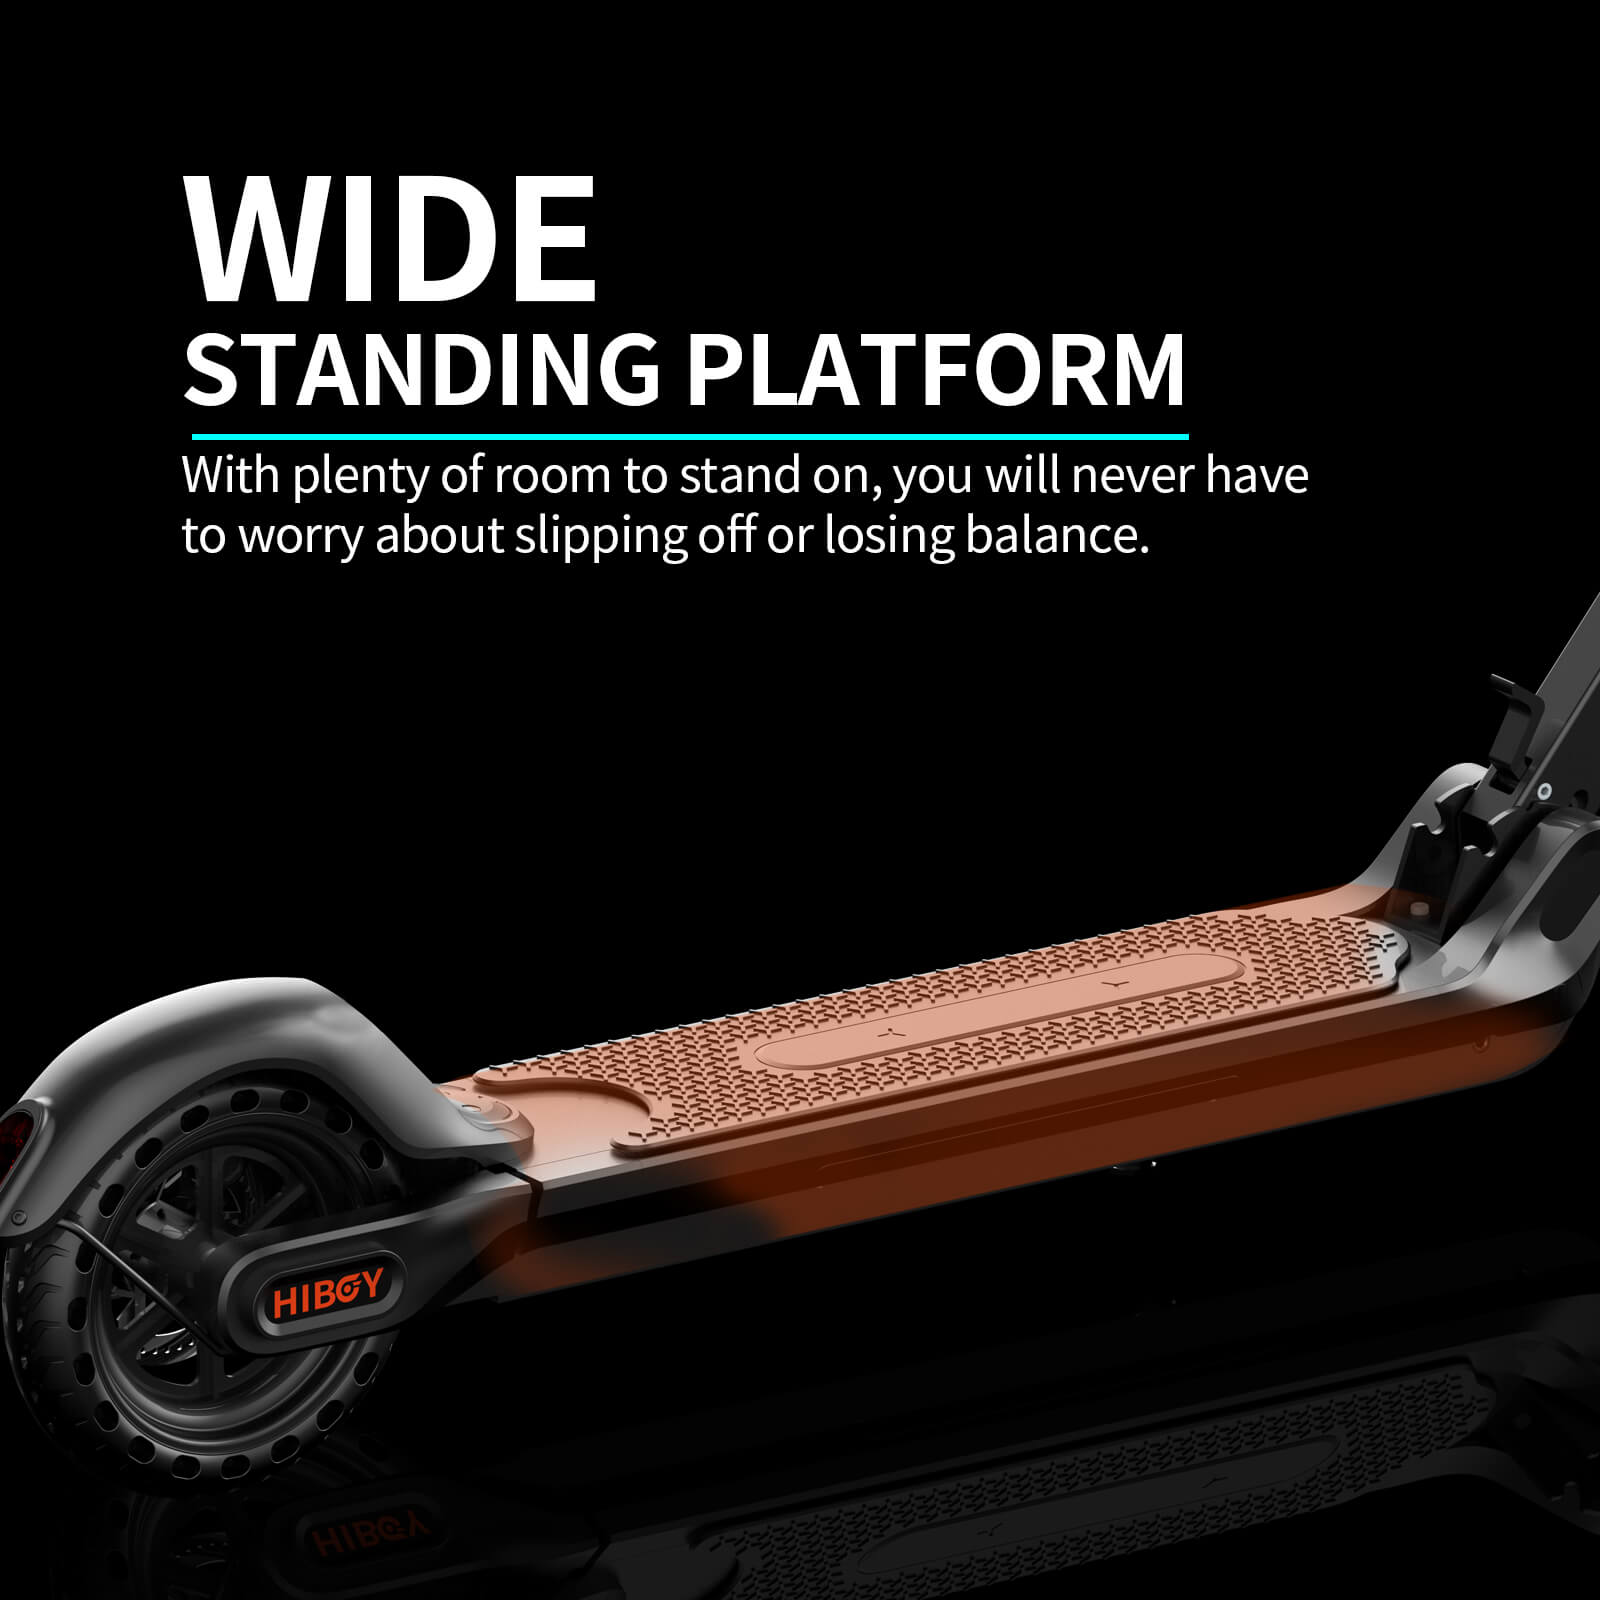 HIBOY MAX V2 Electric Scooter wide standing patform